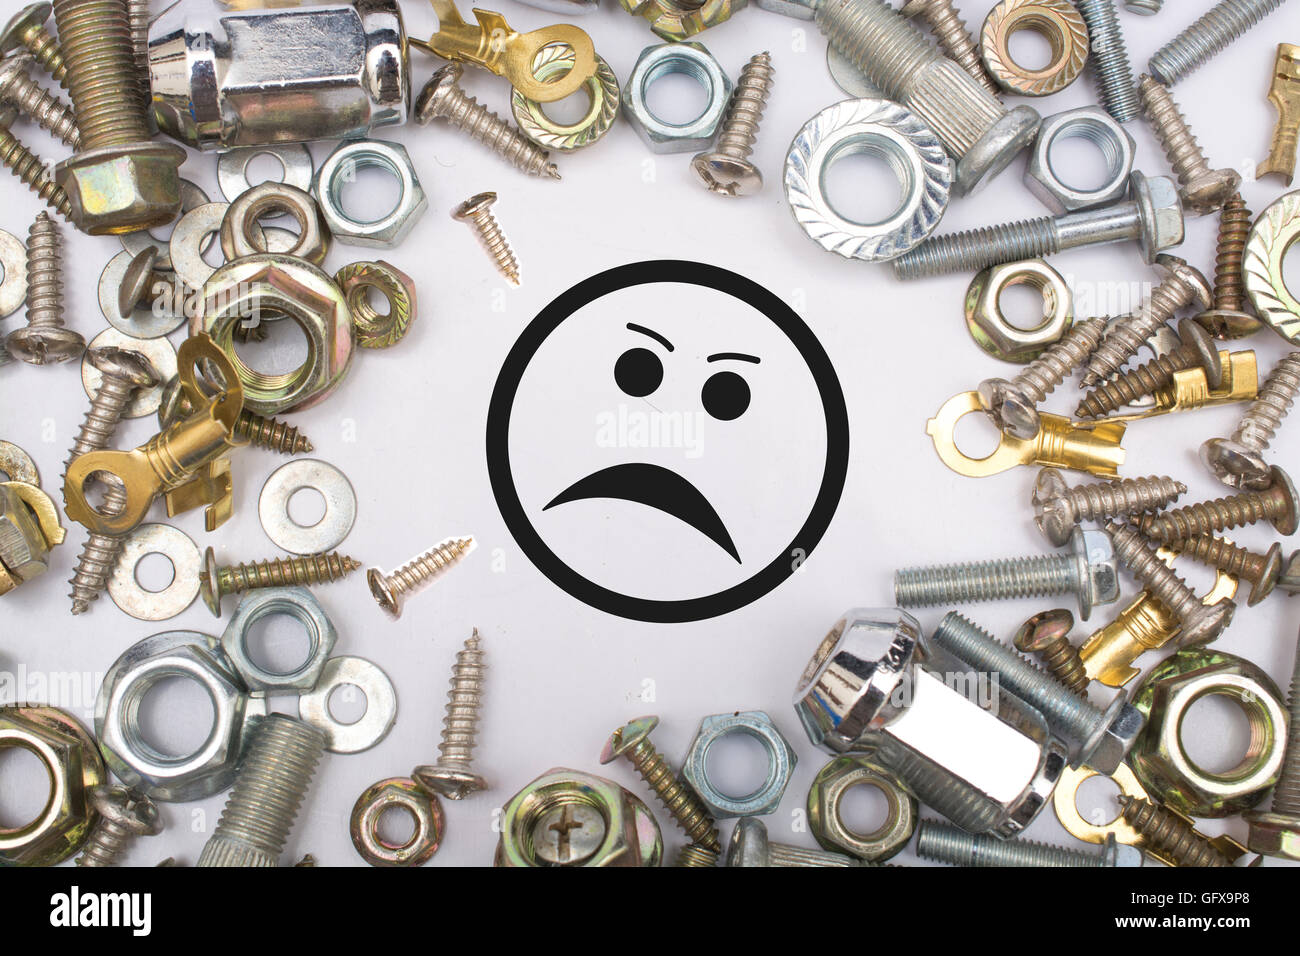 Frustrated Person Icon in nut bolts - irritated concept. Stock Photo